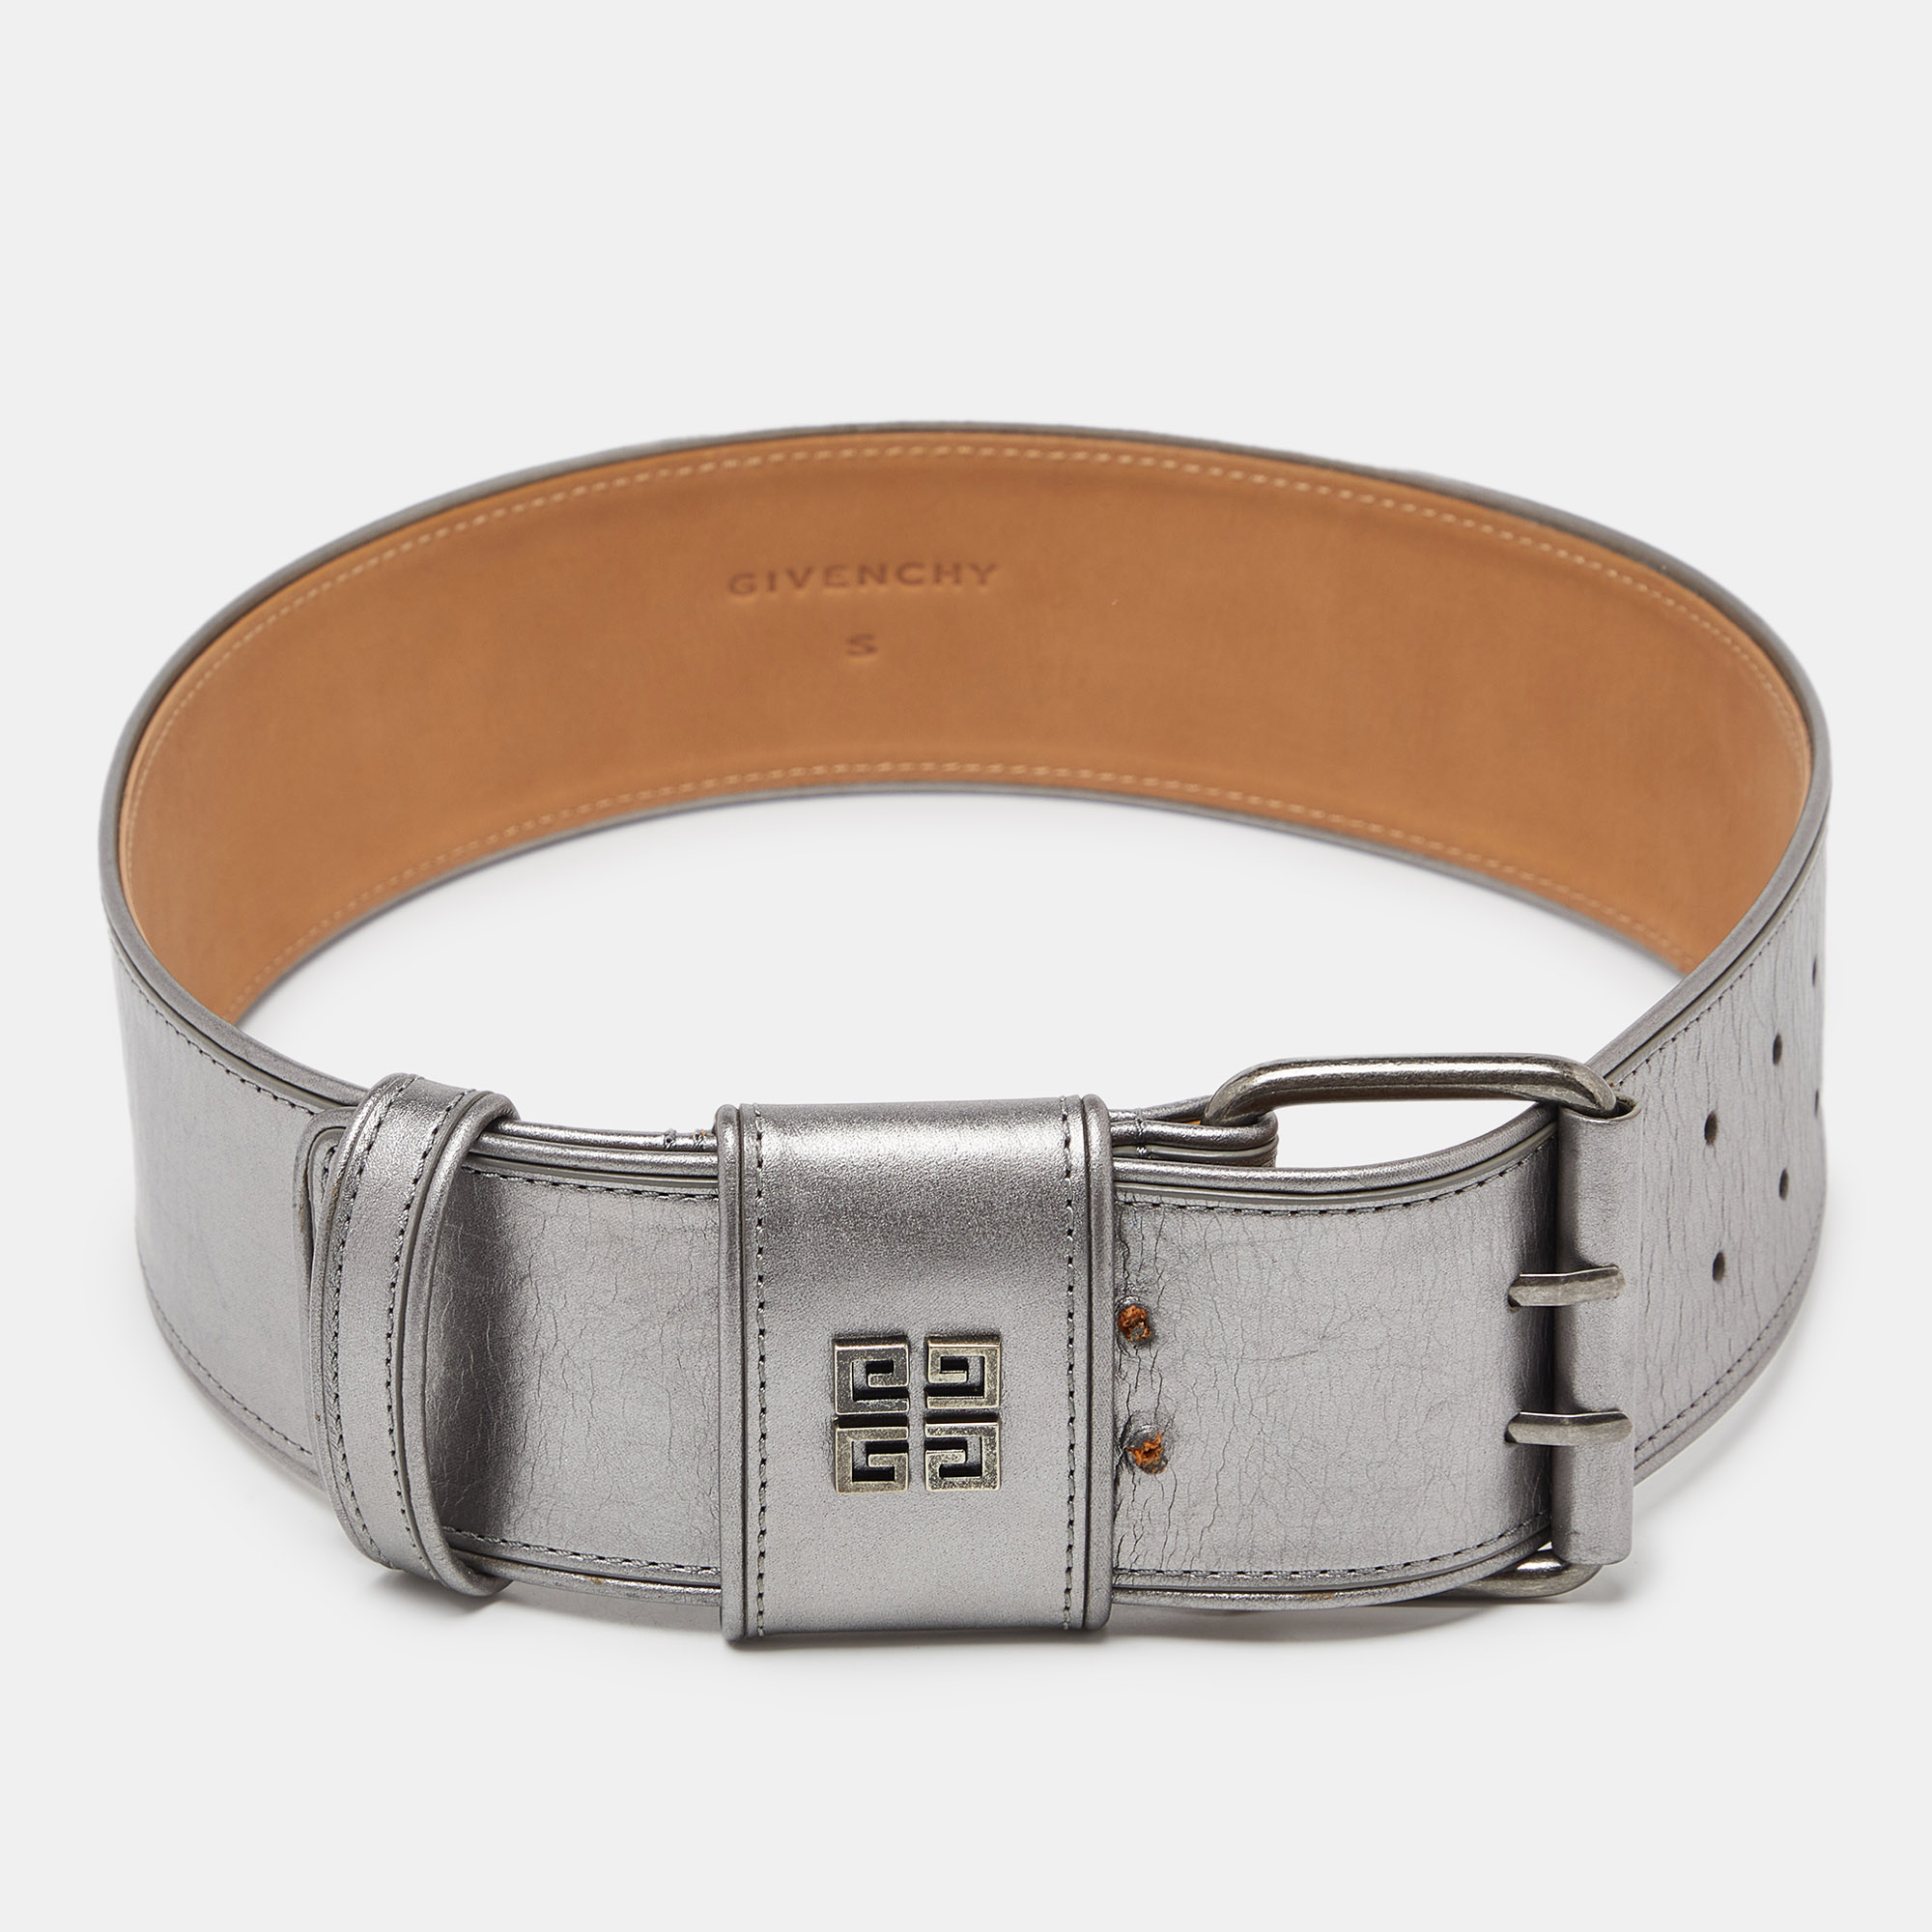 Pre-owned Givenchy Metallic Grey Leather Wide Waist Belt S